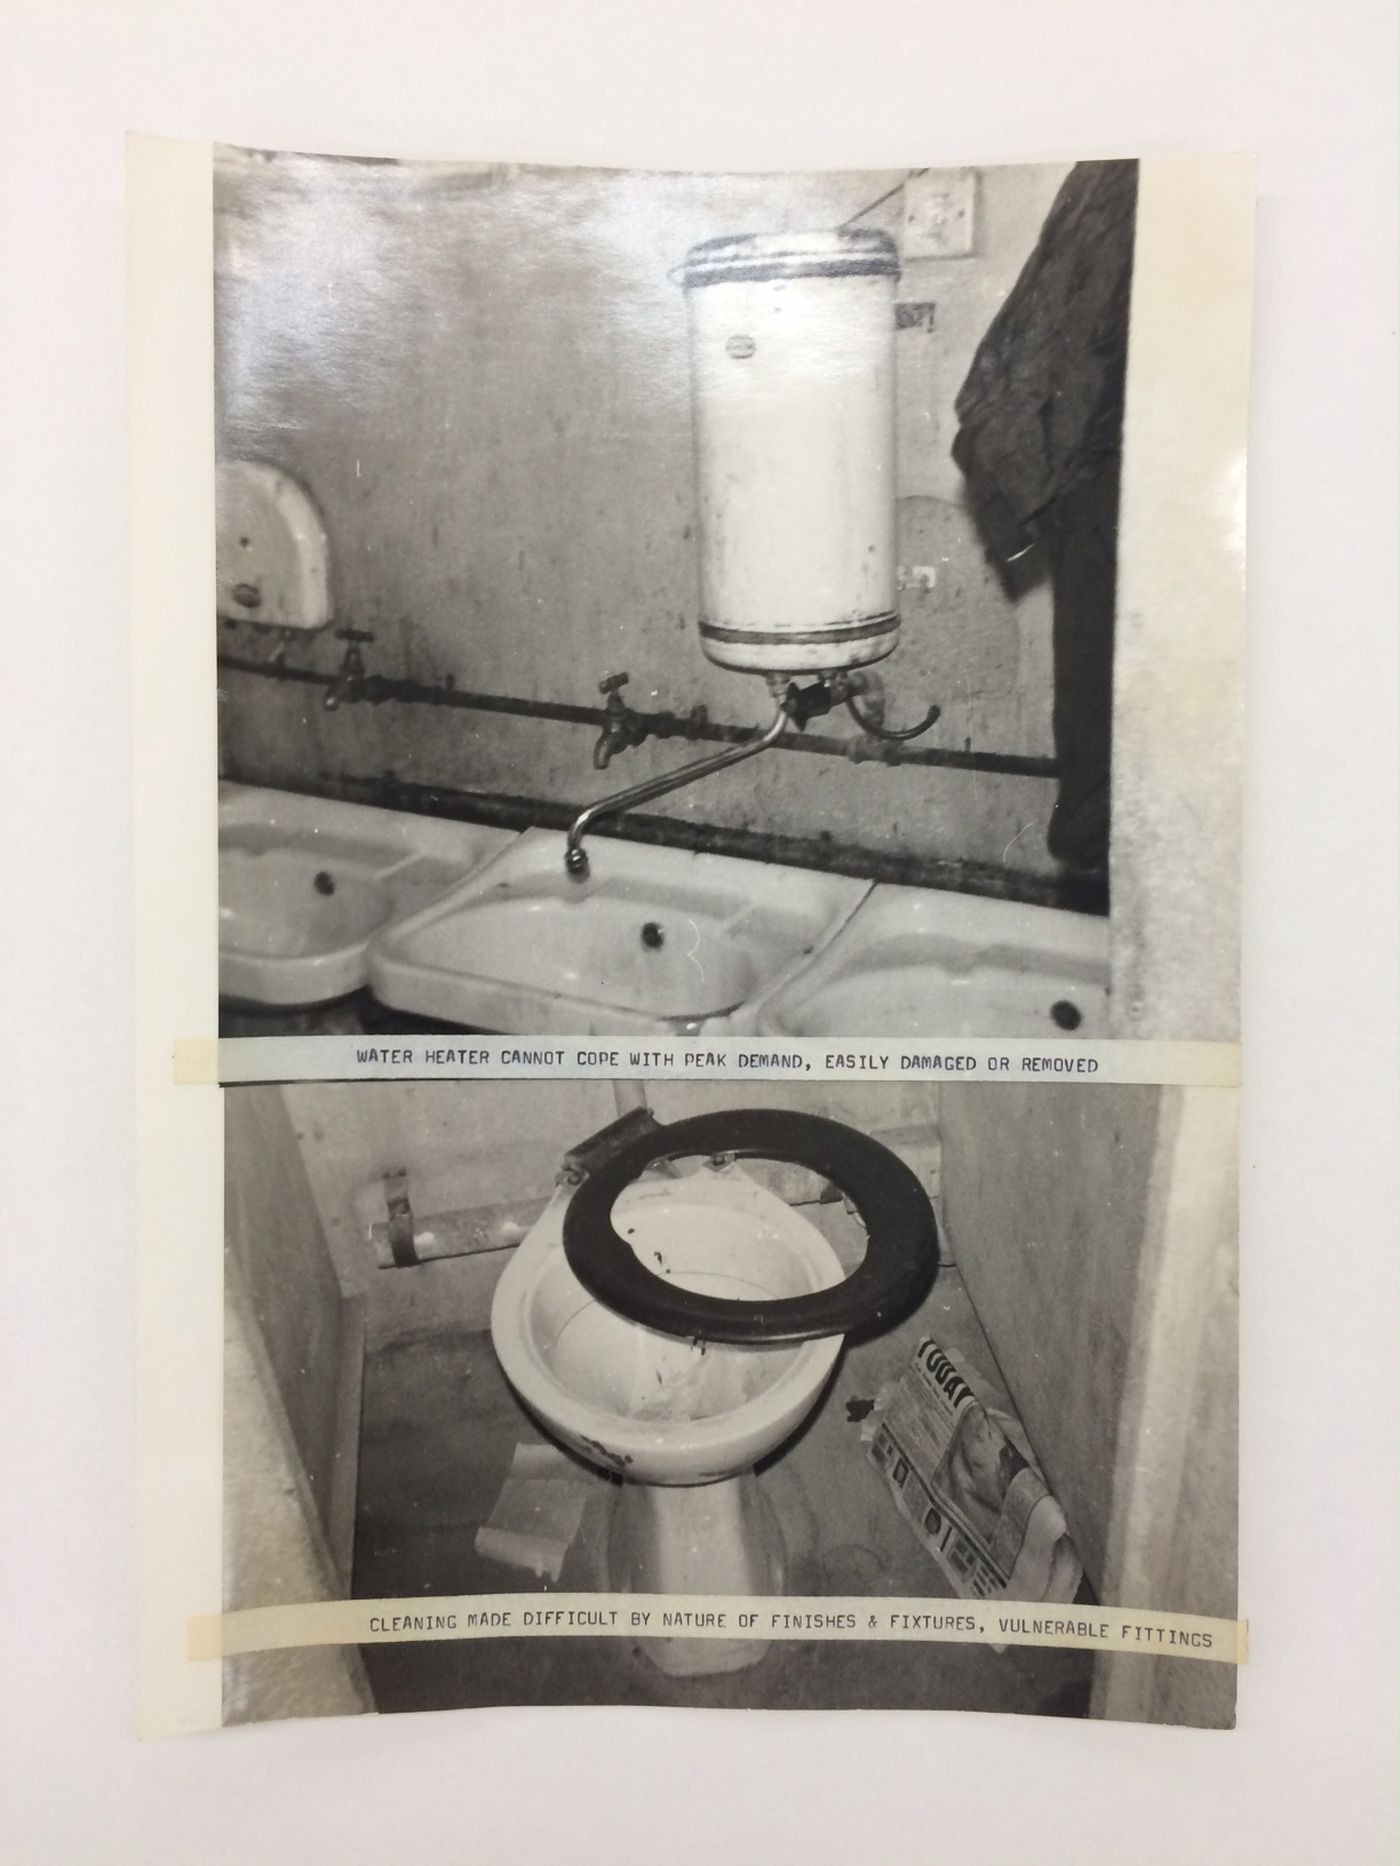 Views of bathroom, with observations (from McAppy project series)